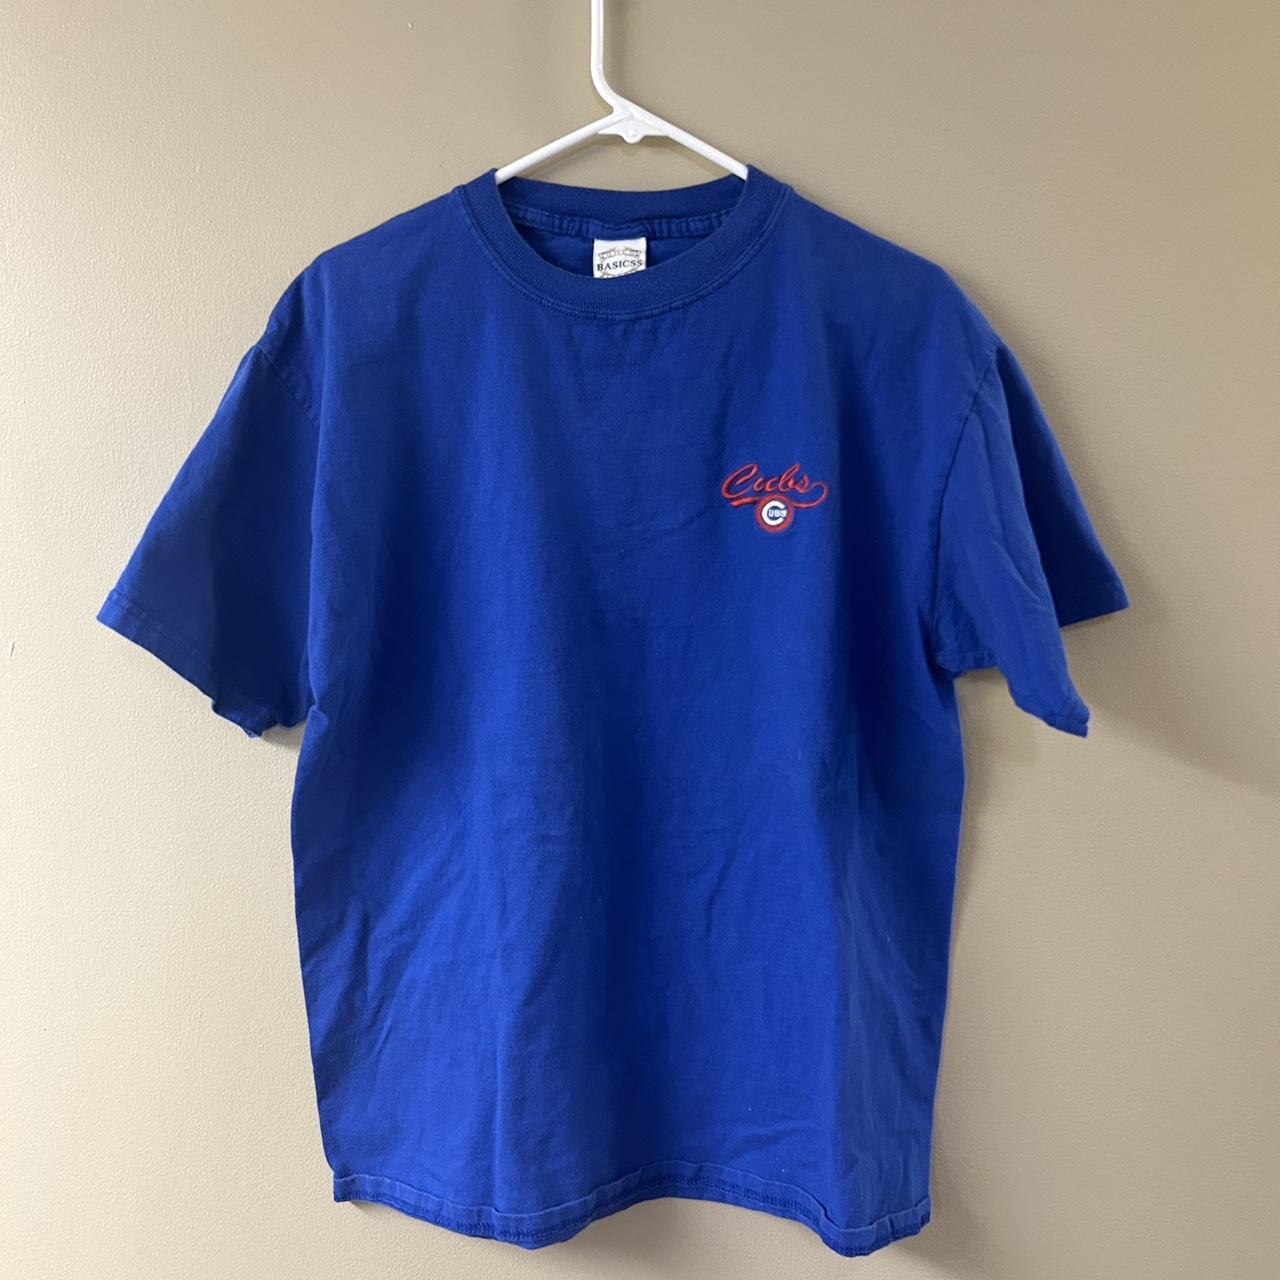 Vintage Cubs Embroidered Shirt. Great condition,... - Depop